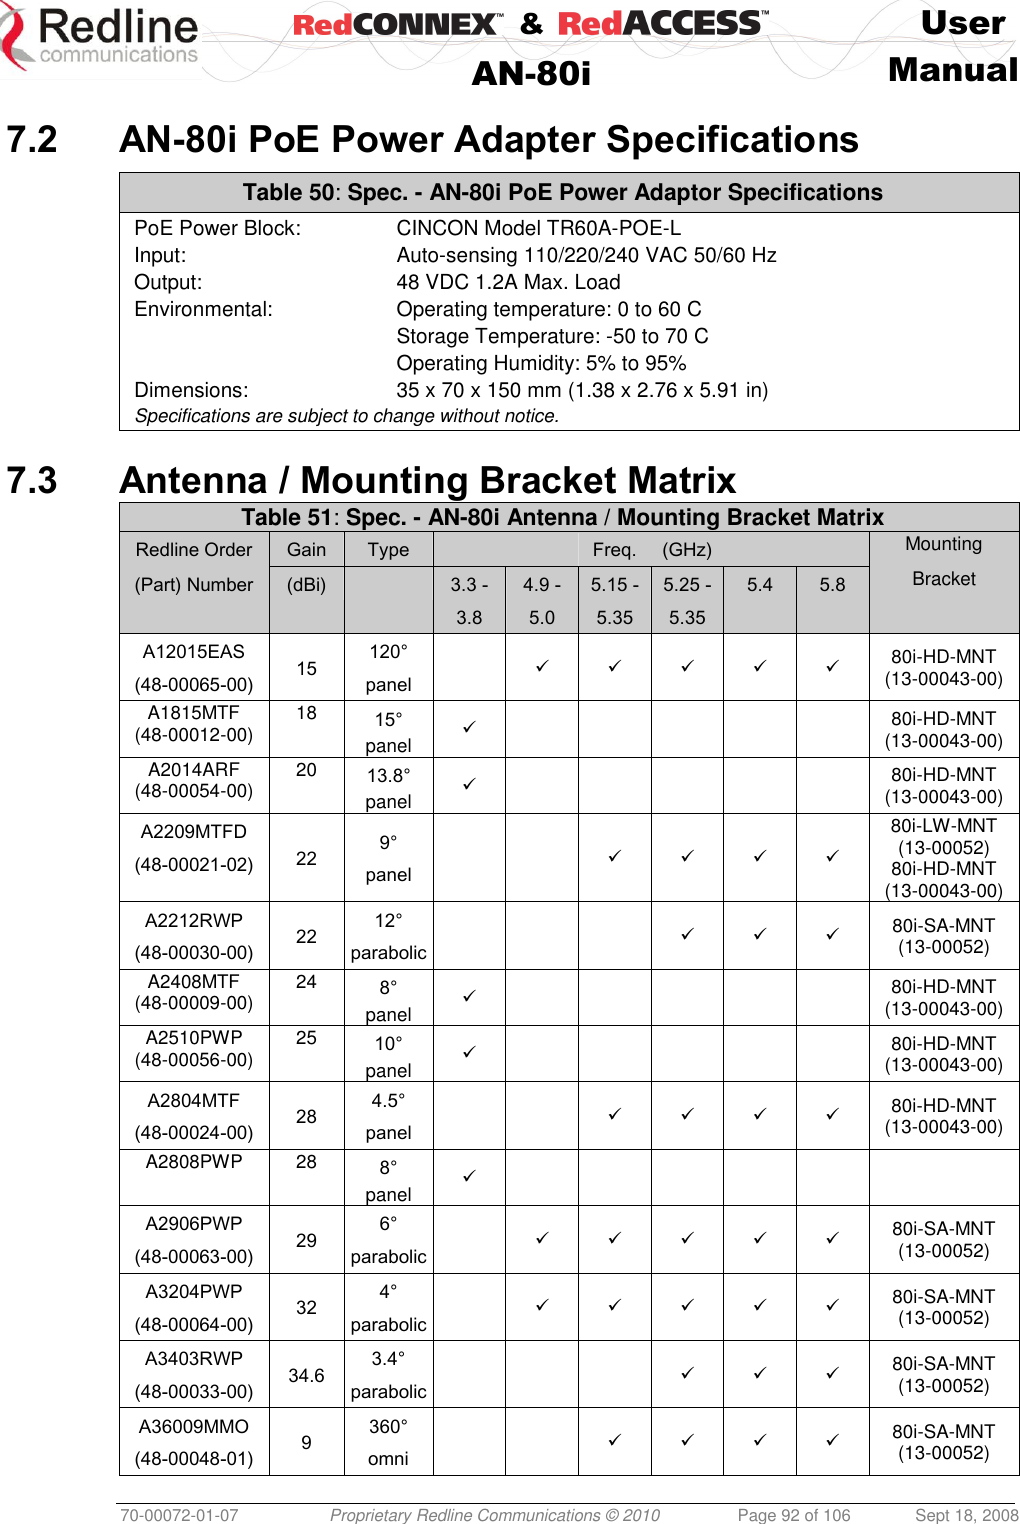    &amp;  User  AN-80i Manual  70-00072-01-07 Proprietary Redline Communications © 2010  Page 92 of 106  Sept 18, 2008  7.2 AN-80i PoE Power Adapter Specifications  Table 50: Spec. - AN-80i PoE Power Adaptor Specifications PoE Power Block:  CINCON Model TR60A-POE-L Input:  Auto-sensing 110/220/240 VAC 50/60 Hz Output:  48 VDC 1.2A Max. Load Environmental:  Operating temperature: 0 to 60 C   Storage Temperature: -50 to 70 C   Operating Humidity: 5% to 95%  Dimensions:  35 x 70 x 150 mm (1.38 x 2.76 x 5.91 in) Specifications are subject to change without notice.   7.3 Antenna / Mounting Bracket Matrix Table 51: Spec. - AN-80i Antenna / Mounting Bracket Matrix Redline Order  Gain Type   Freq. (GHz)   Mounting (Part) Number (dBi)  3.3 - 3.8 4.9 - 5.0 5.15 - 5.35 5.25 - 5.35 5.4 5.8 Bracket A12015EAS (48-00065-00) 15 120° panel 80i-HD-MNT (13-00043-00) A1815MTF (48-00012-00) 18 15° panel   80i-HD-MNT (13-00043-00) A2014ARF (48-00054-00) 20 13.8° panel   80i-HD-MNT (13-00043-00) A2209MTFD (48-00021-02) 22 9° panel   80i-LW-MNT (13-00052) 80i-HD-MNT (13-00043-00) A2212RWP (48-00030-00) 22 12° parabolic     80i-SA-MNT (13-00052) A2408MTF (48-00009-00) 24 8° panel   80i-HD-MNT (13-00043-00) A2510PWP (48-00056-00) 25 10° panel   80i-HD-MNT (13-00043-00) A2804MTF (48-00024-00) 28 4.5° panel     80i-HD-MNT (13-00043-00) A2808PWP 28 8° panel    A2906PWP (48-00063-00) 29 6° parabolic   80i-SA-MNT (13-00052) A3204PWP (48-00064-00) 32 4° parabolic   80i-SA-MNT (13-00052) A3403RWP (48-00033-00) 34.6 3.4° parabolic      80i-SA-MNT (13-00052) A36009MMO (48-00048-01) 9 360° omni    80i-SA-MNT (13-00052) 